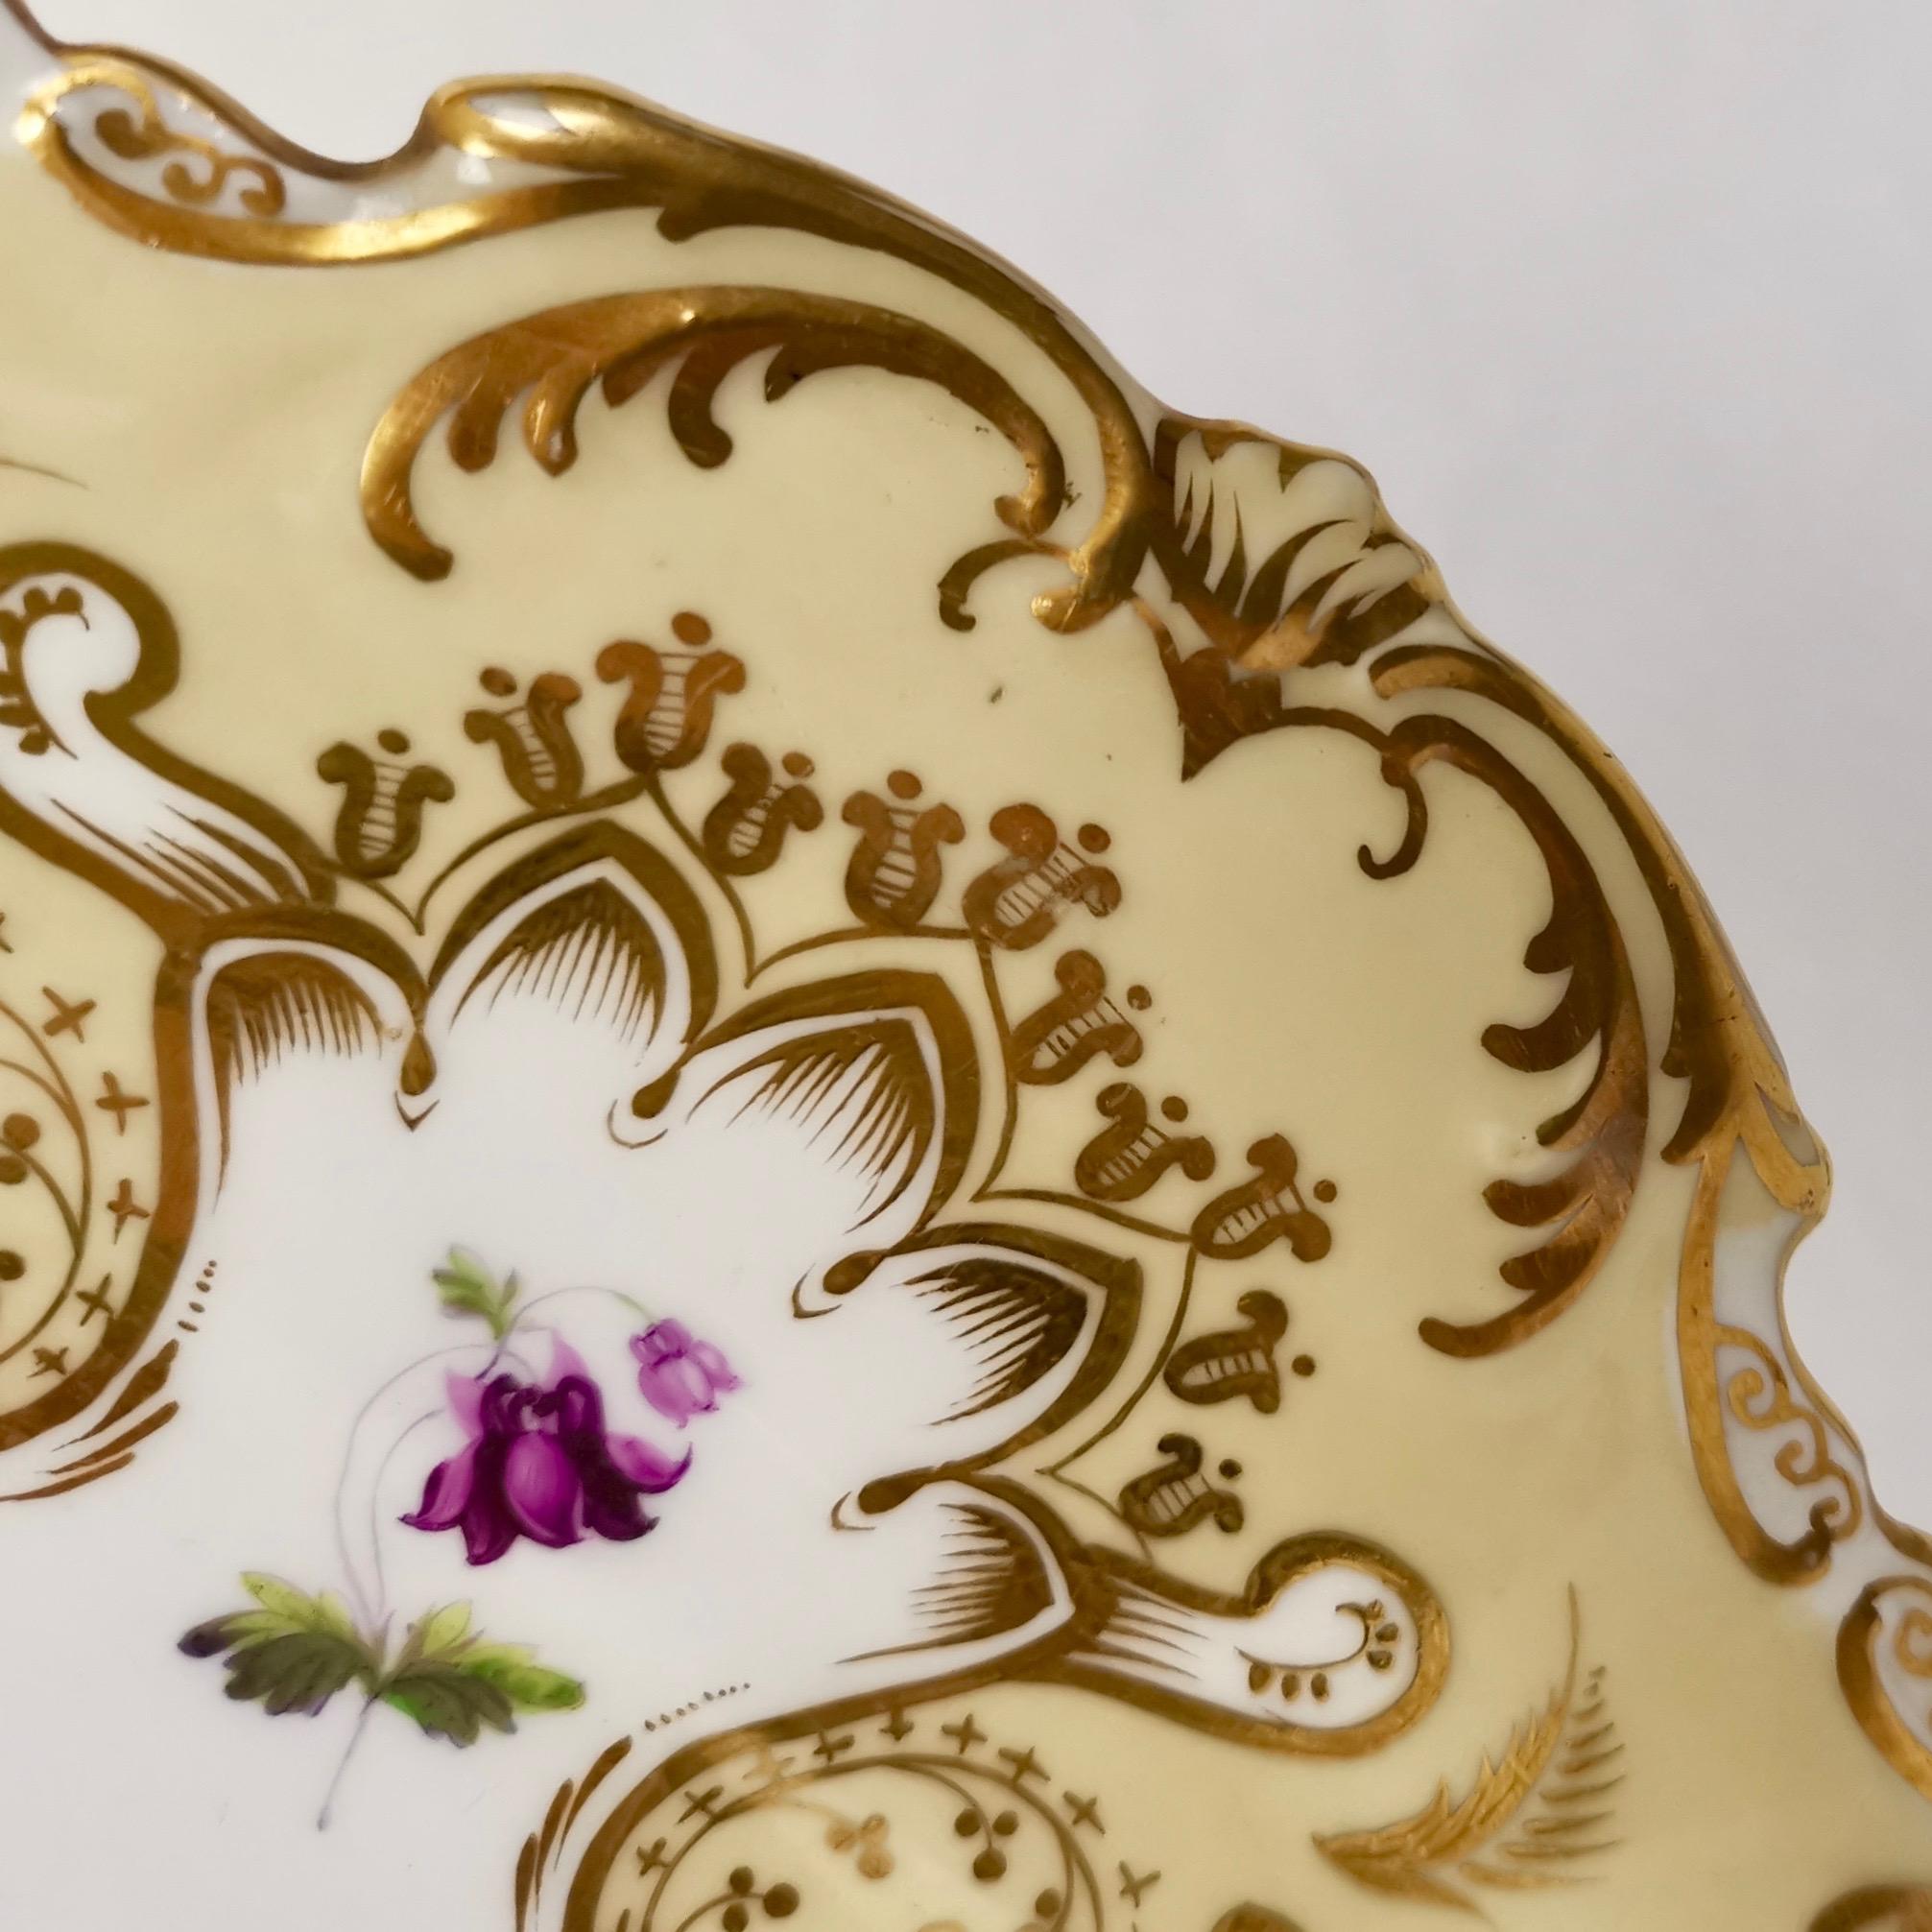 Hand-Painted Coalport Porcelain Cake Plate, Beige and Gilt, Flowers by Thomas Dixon, 1837